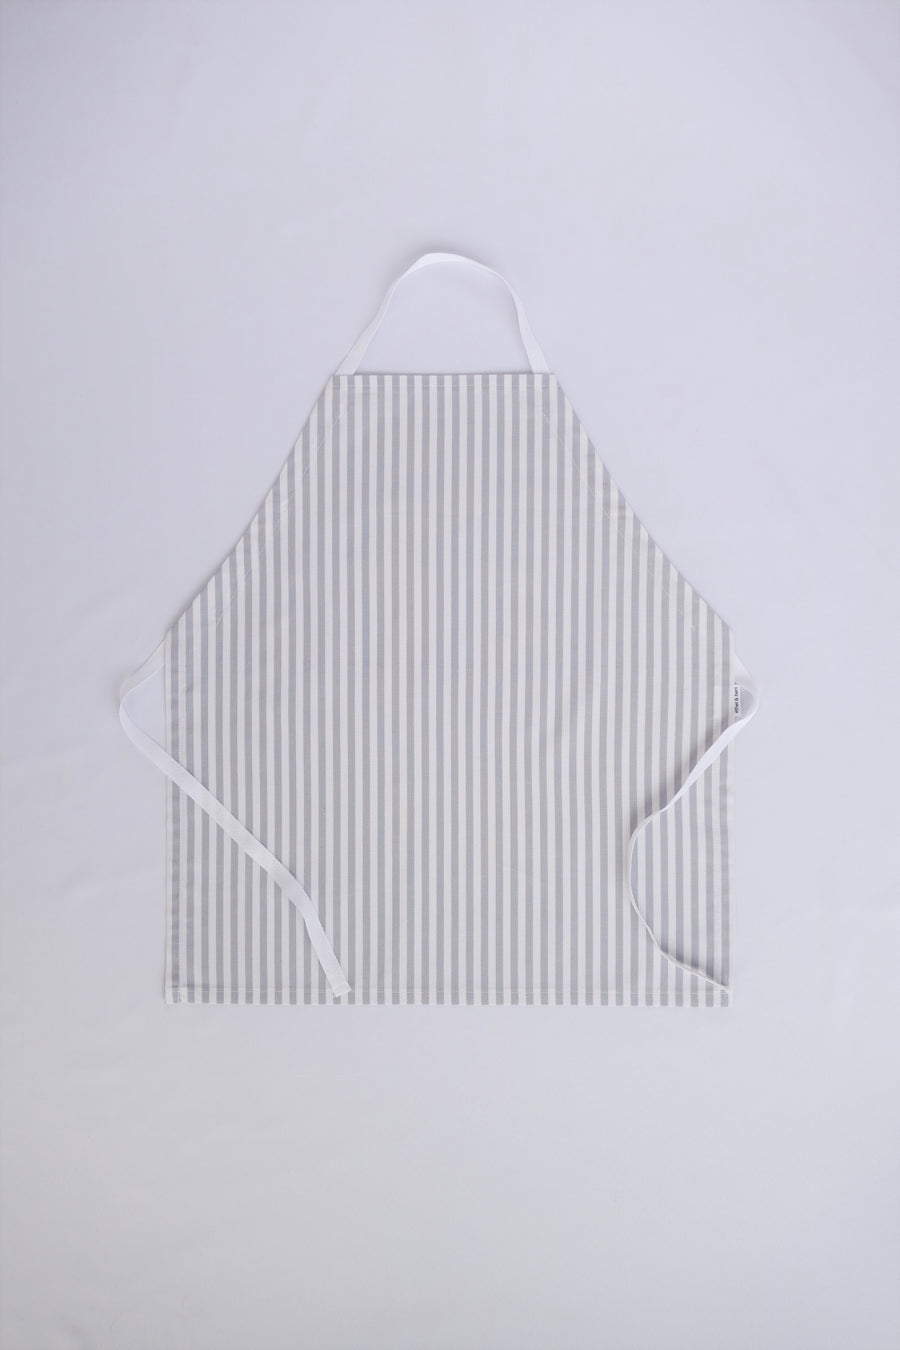 Little Worker Apron - Grey and White Stripes